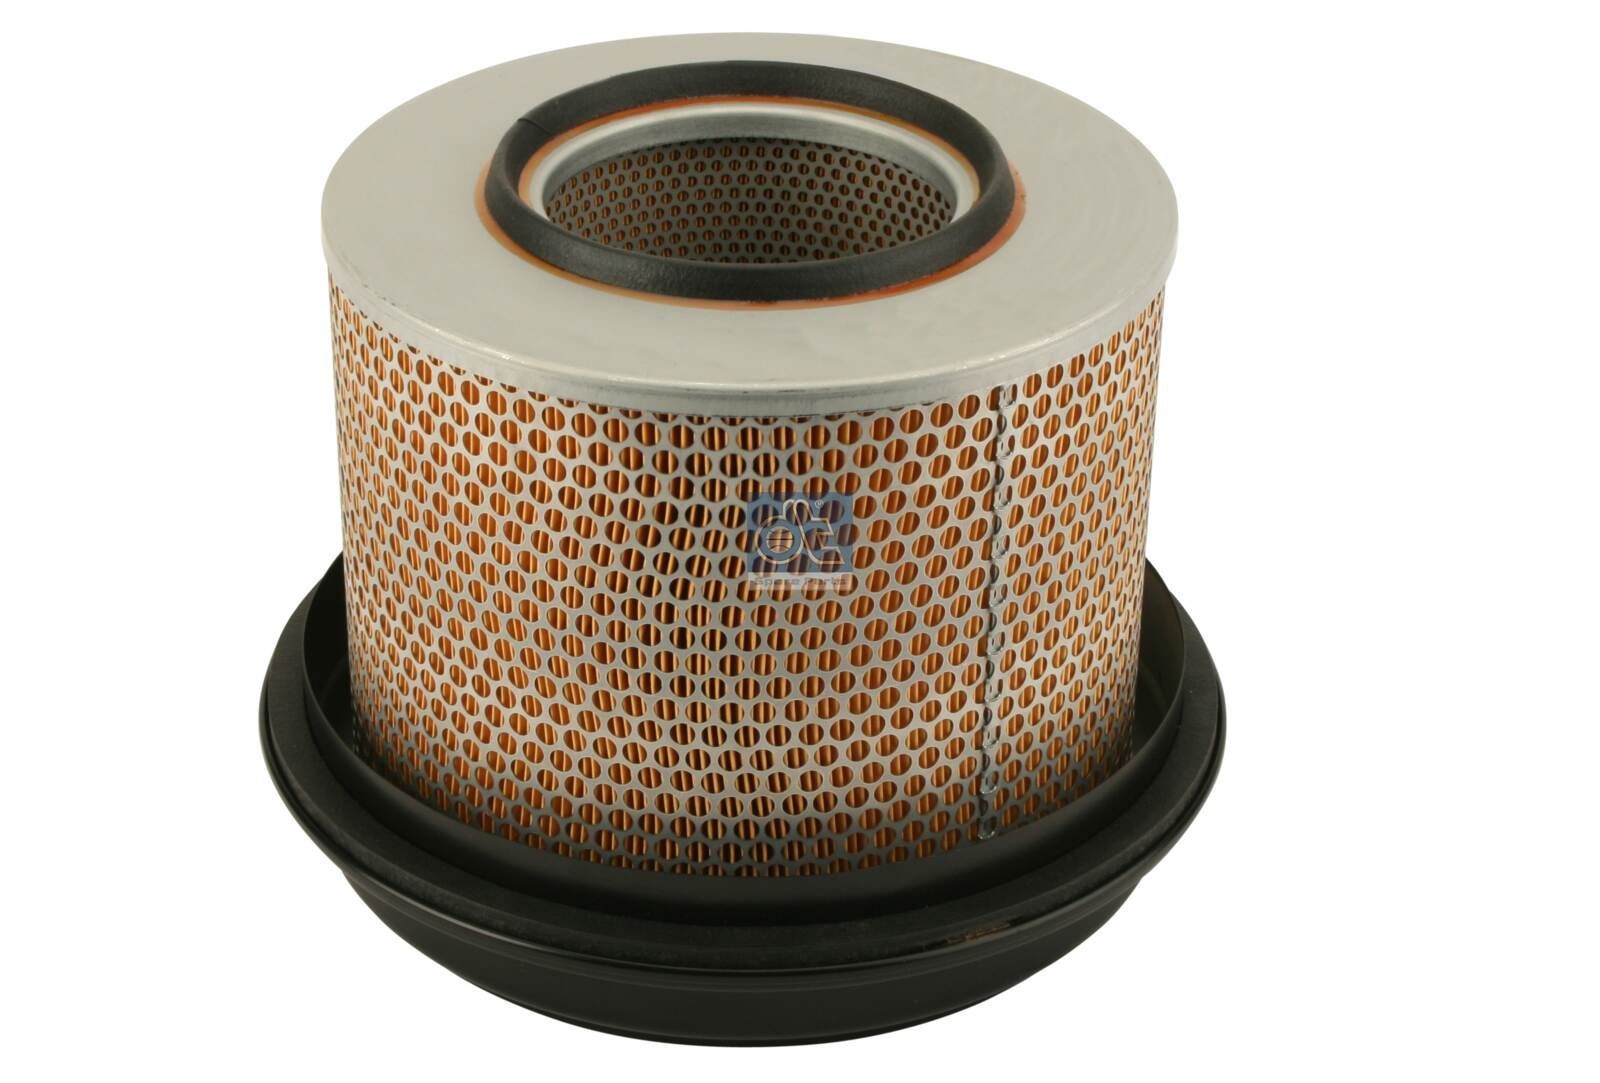 C 28 715 DT Spare Parts 252mm, 273mm, Filter Insert Height: 252mm Engine air filter 4.61532 buy